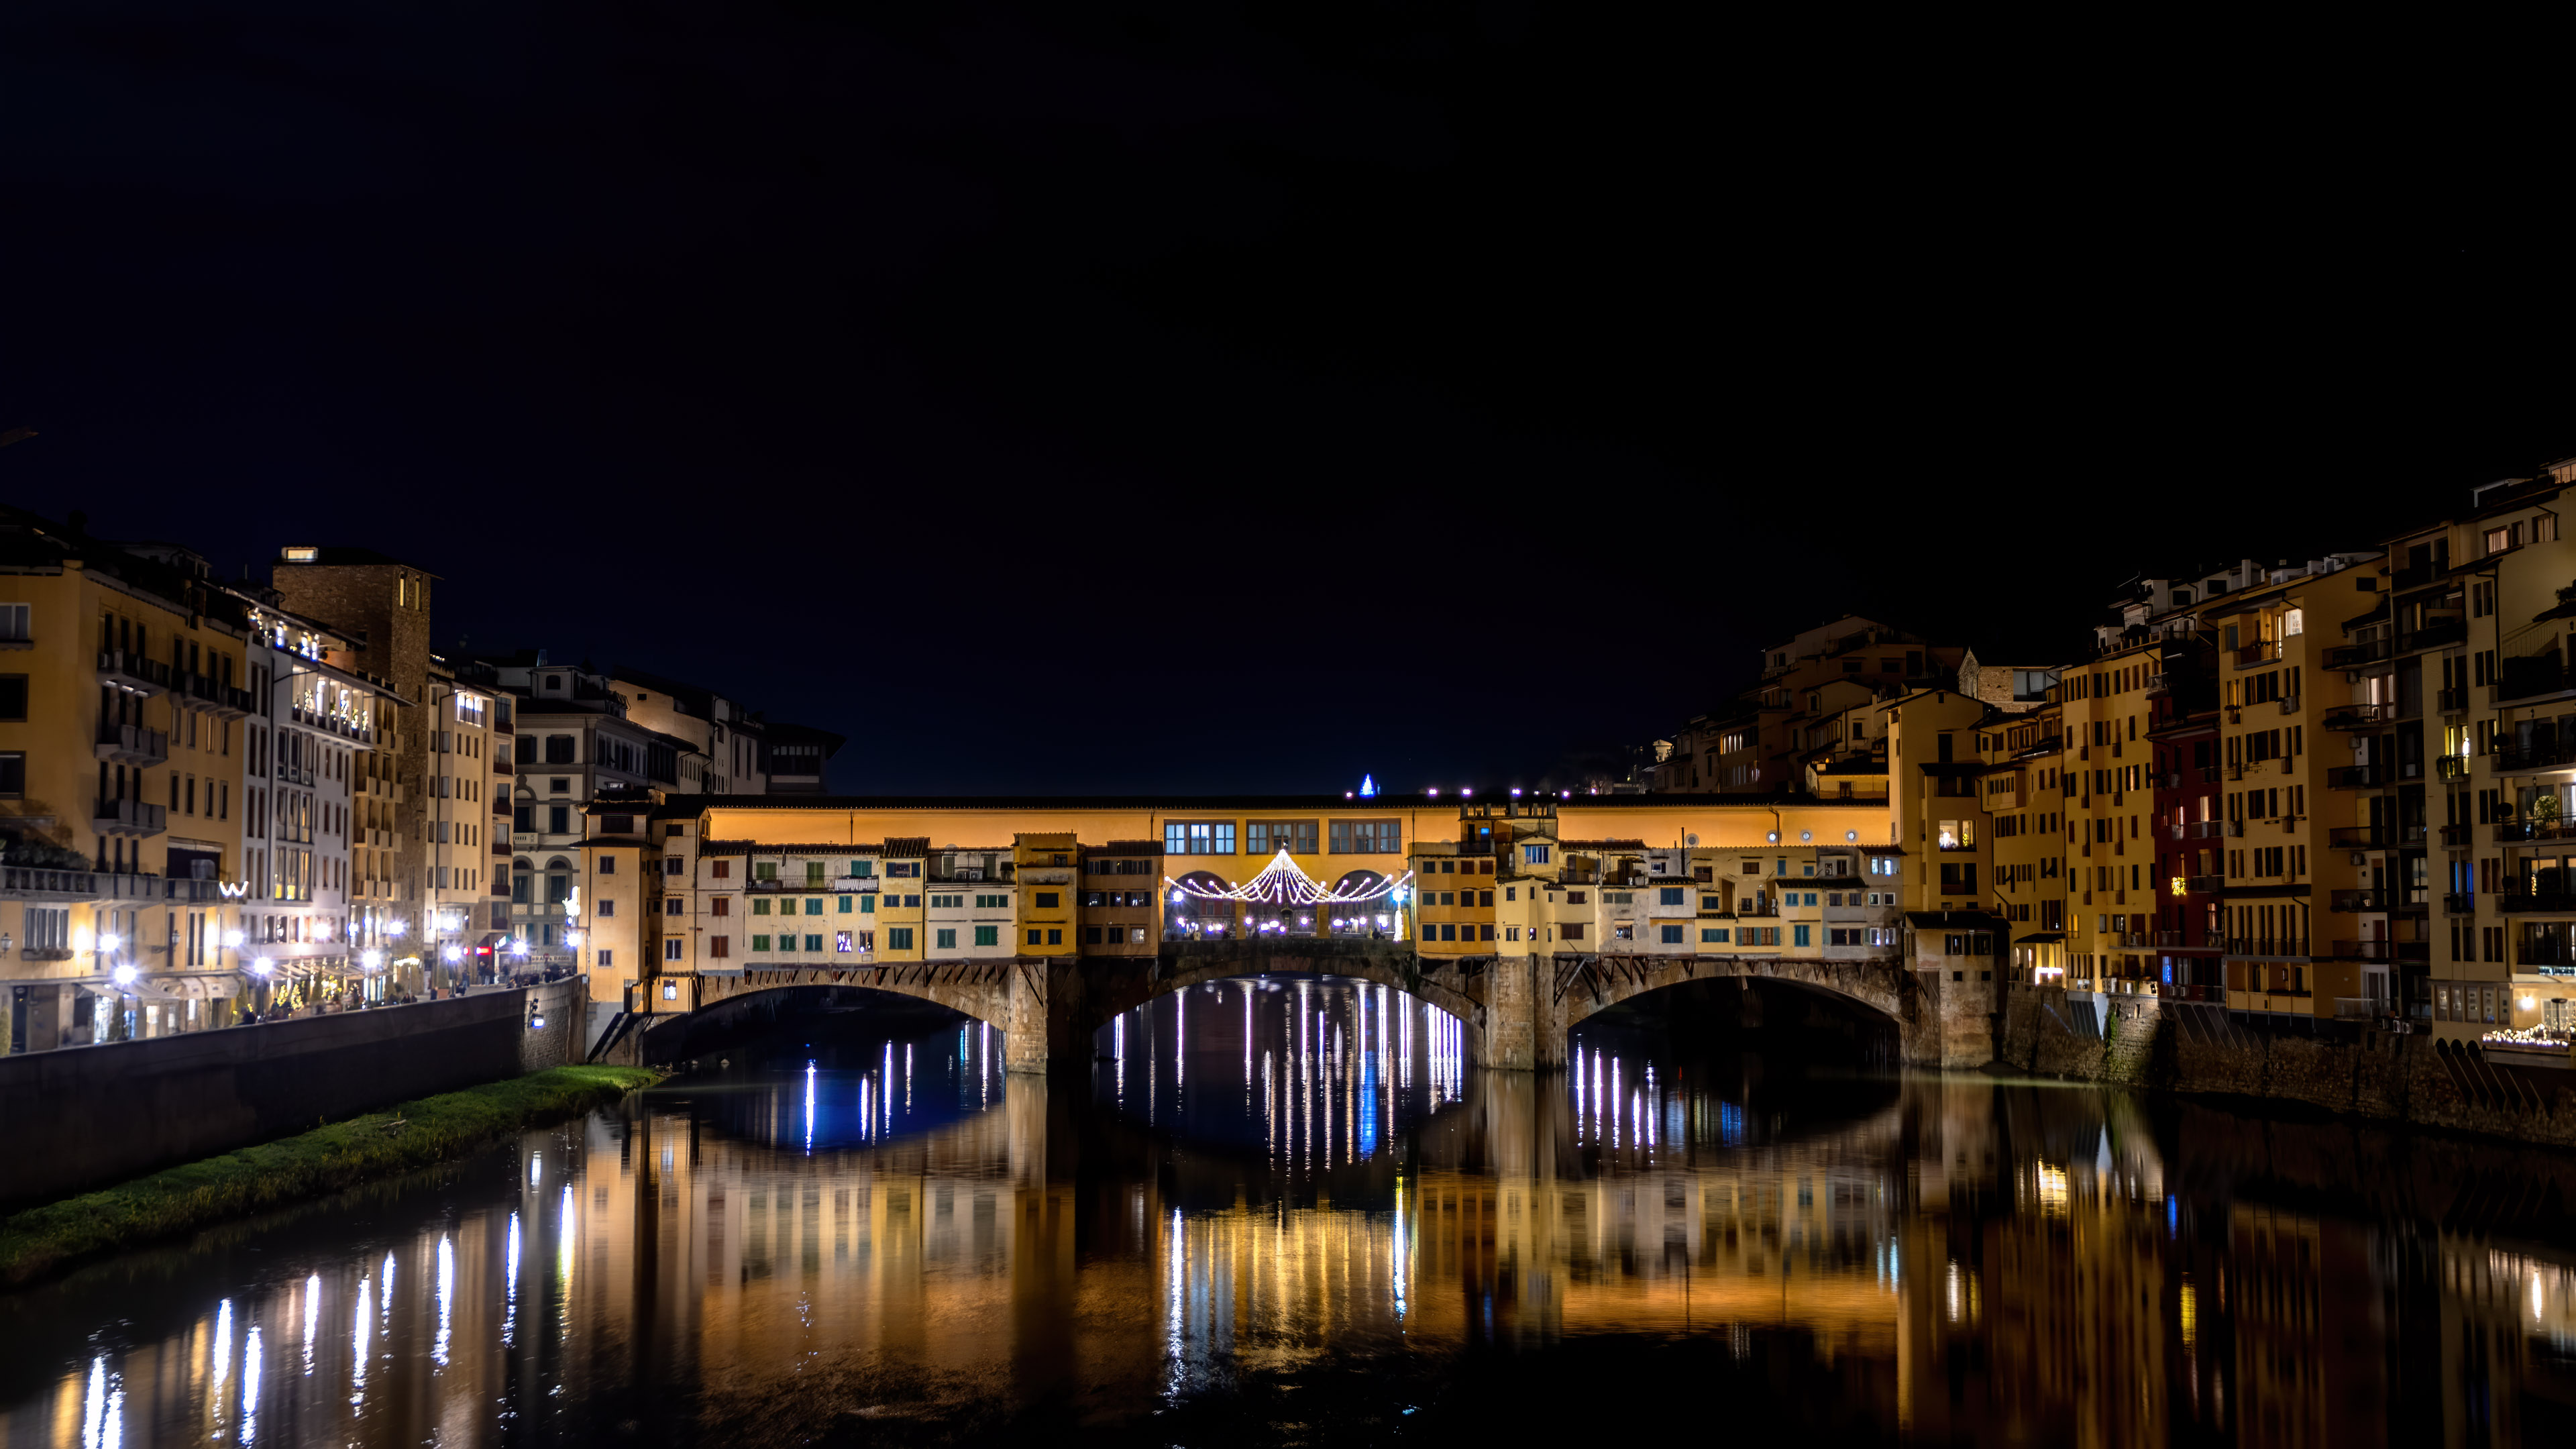 Experience the beauty of Florence at night with this stunning city wallpaper.